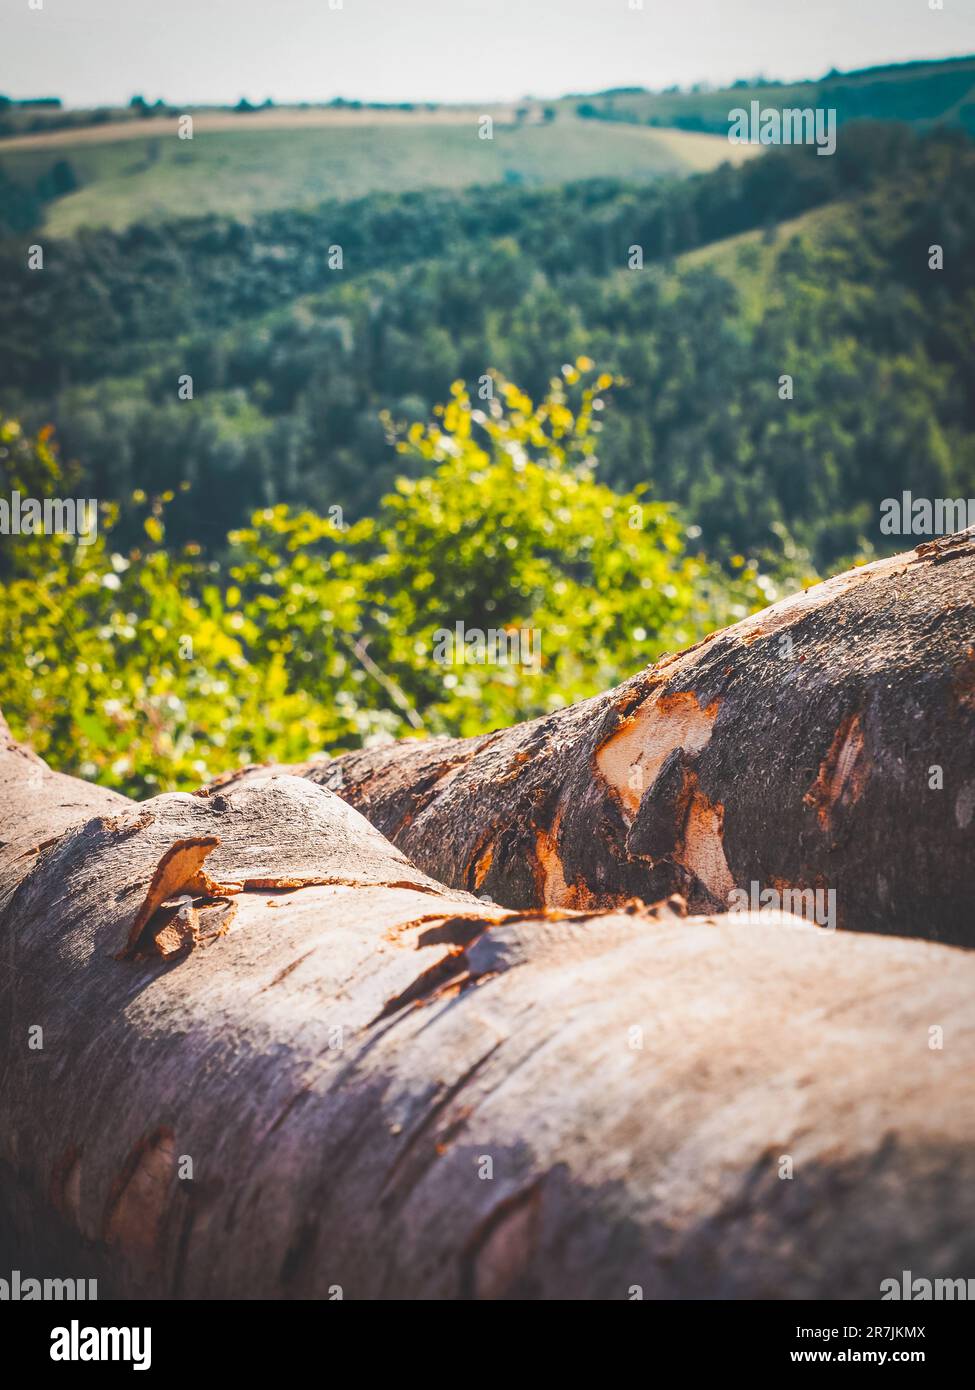 A large tree trunk on the ground, surrounded by a lush forest of trees, Slovak nature, Gemer region. Stock Photo